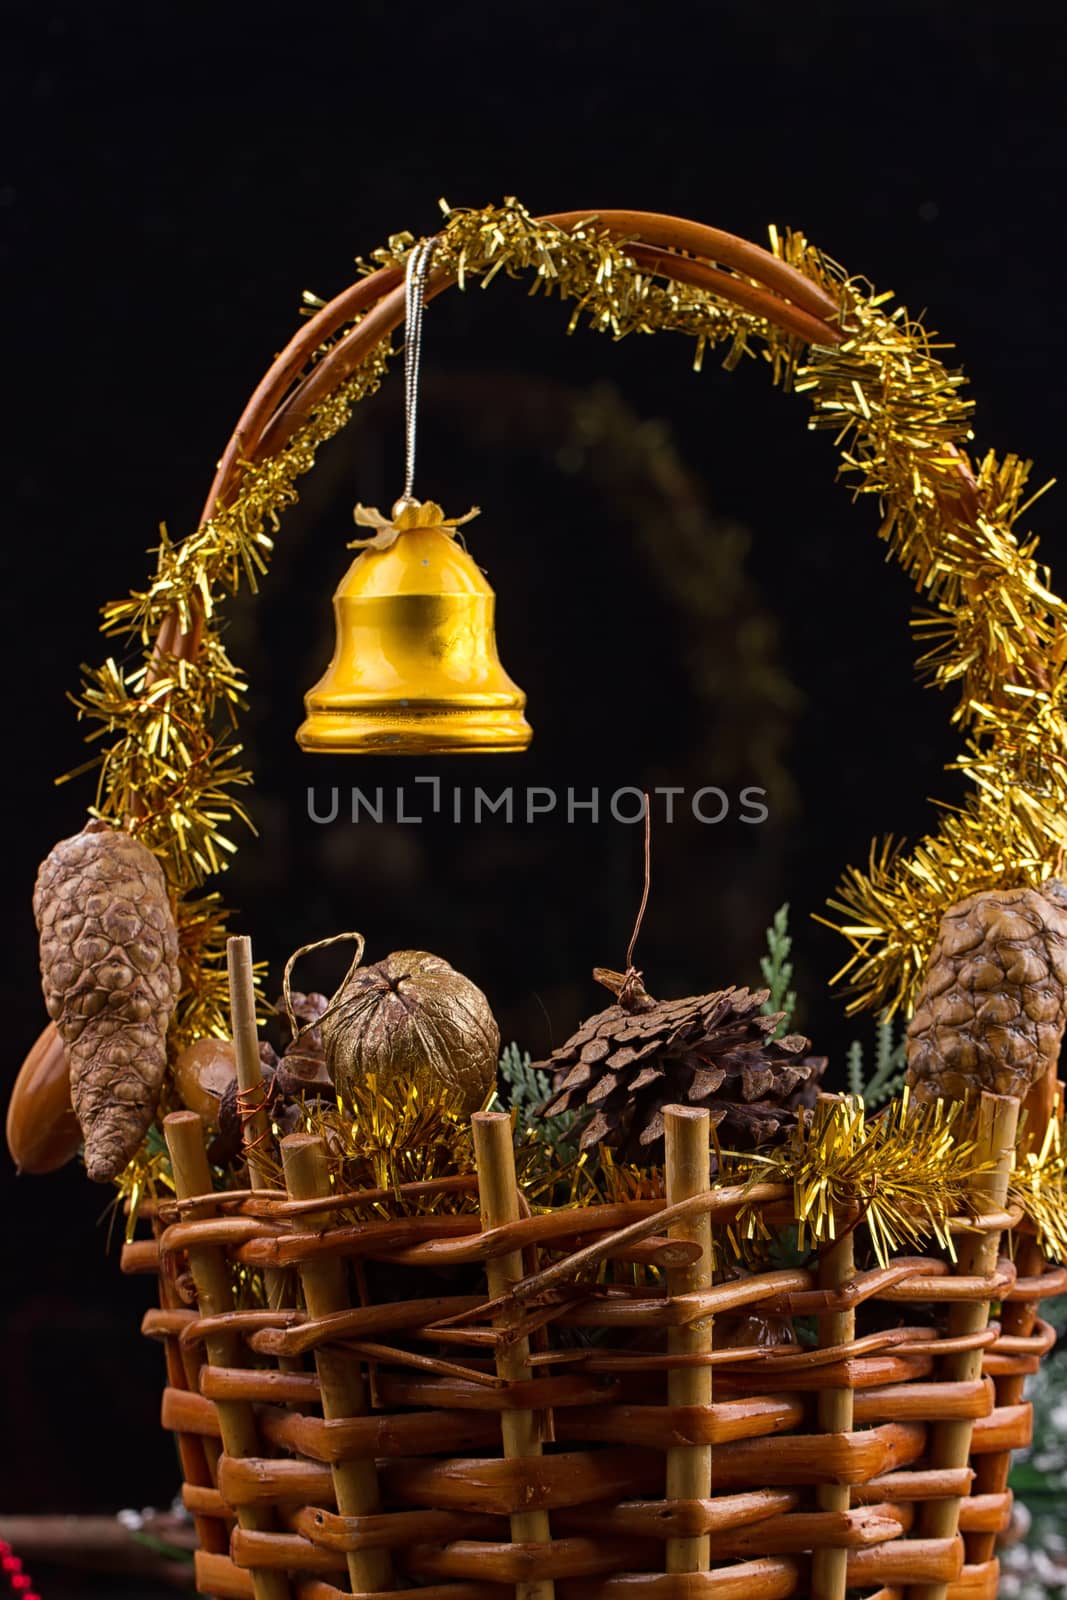 Christmas ornaments with garland of beads, pine cones and acorns laying in a basket with greens